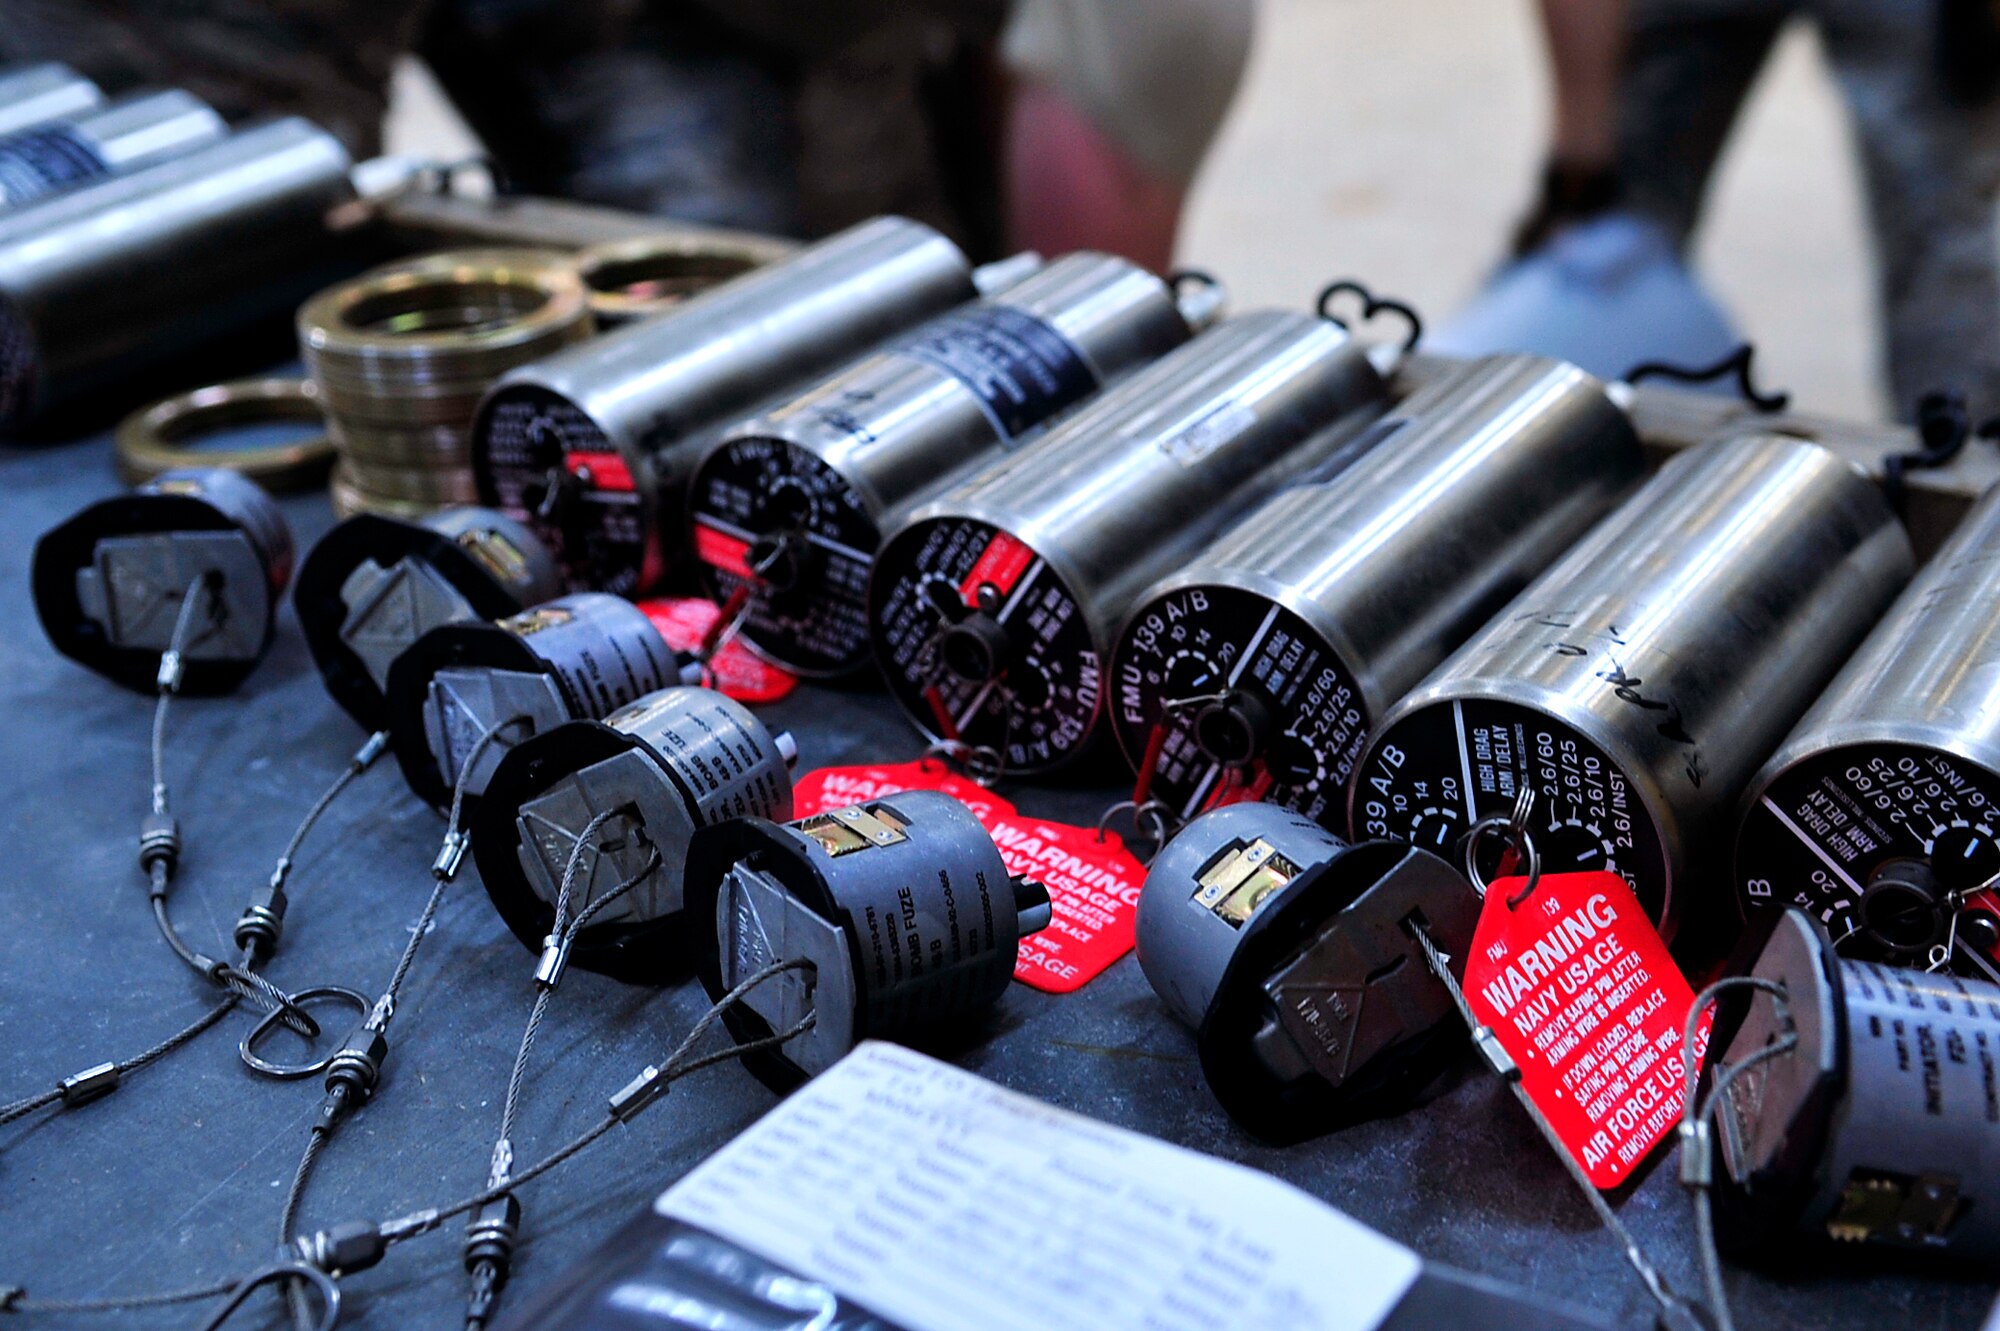 Airmen from the 18th Munitions Squadron place fuses in Mark 83 bomb bodies during Beverly High 10-02 at Kadena Air Base, Japan, March 24. The 18th Wing is participating in a Local Operational Readiness Exercise March 22-26 to test the readiness of Kadena Airmen. (U.S. Air Force photo/Senior Airman Amanda Grabiec)    